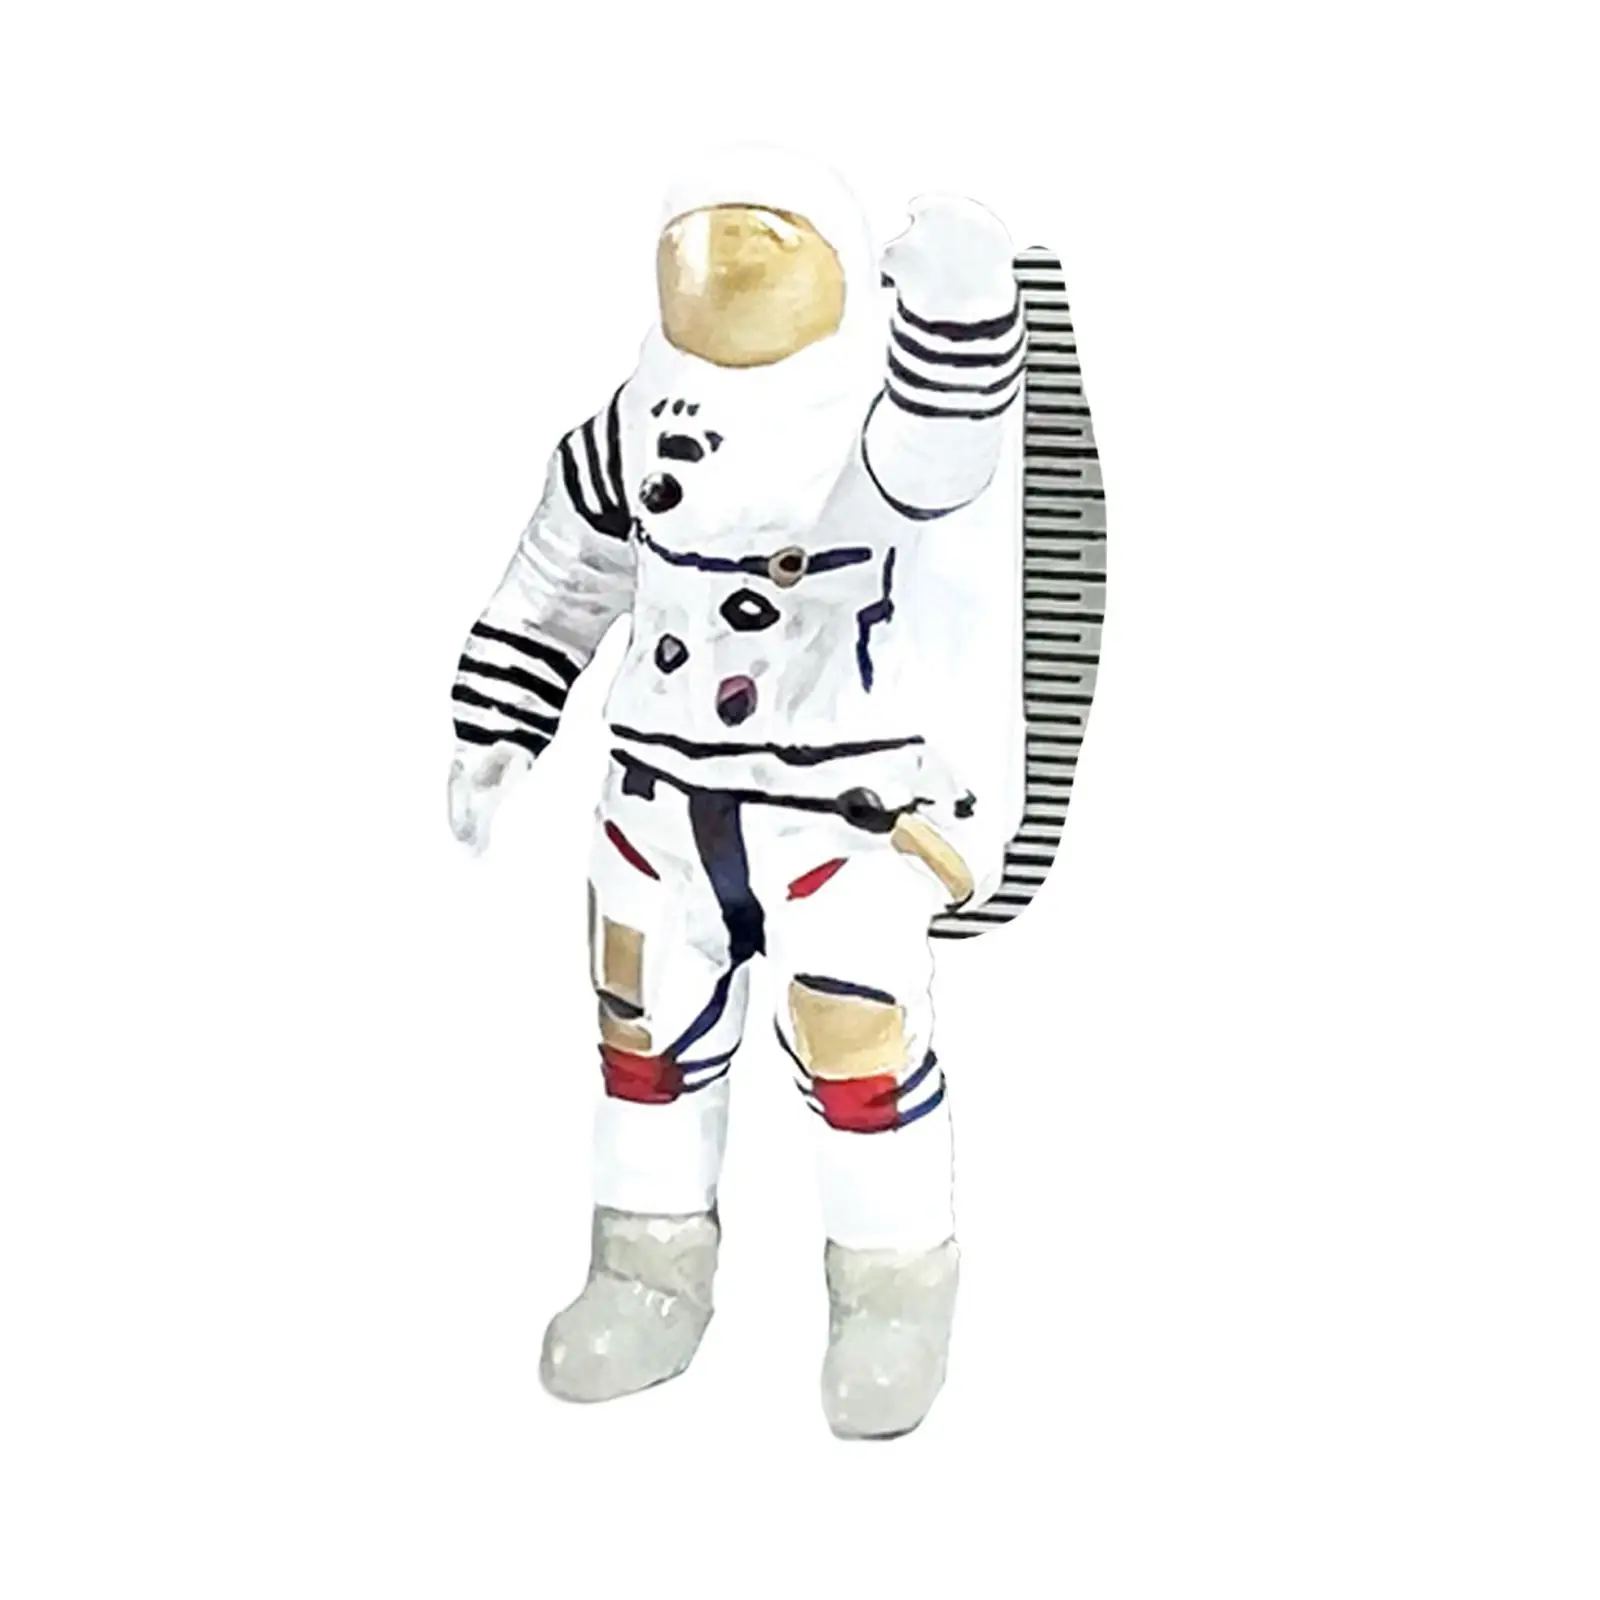 1/64 Scale Astronaut Figurines Spaceman Model for Micro Landscapes Diorama